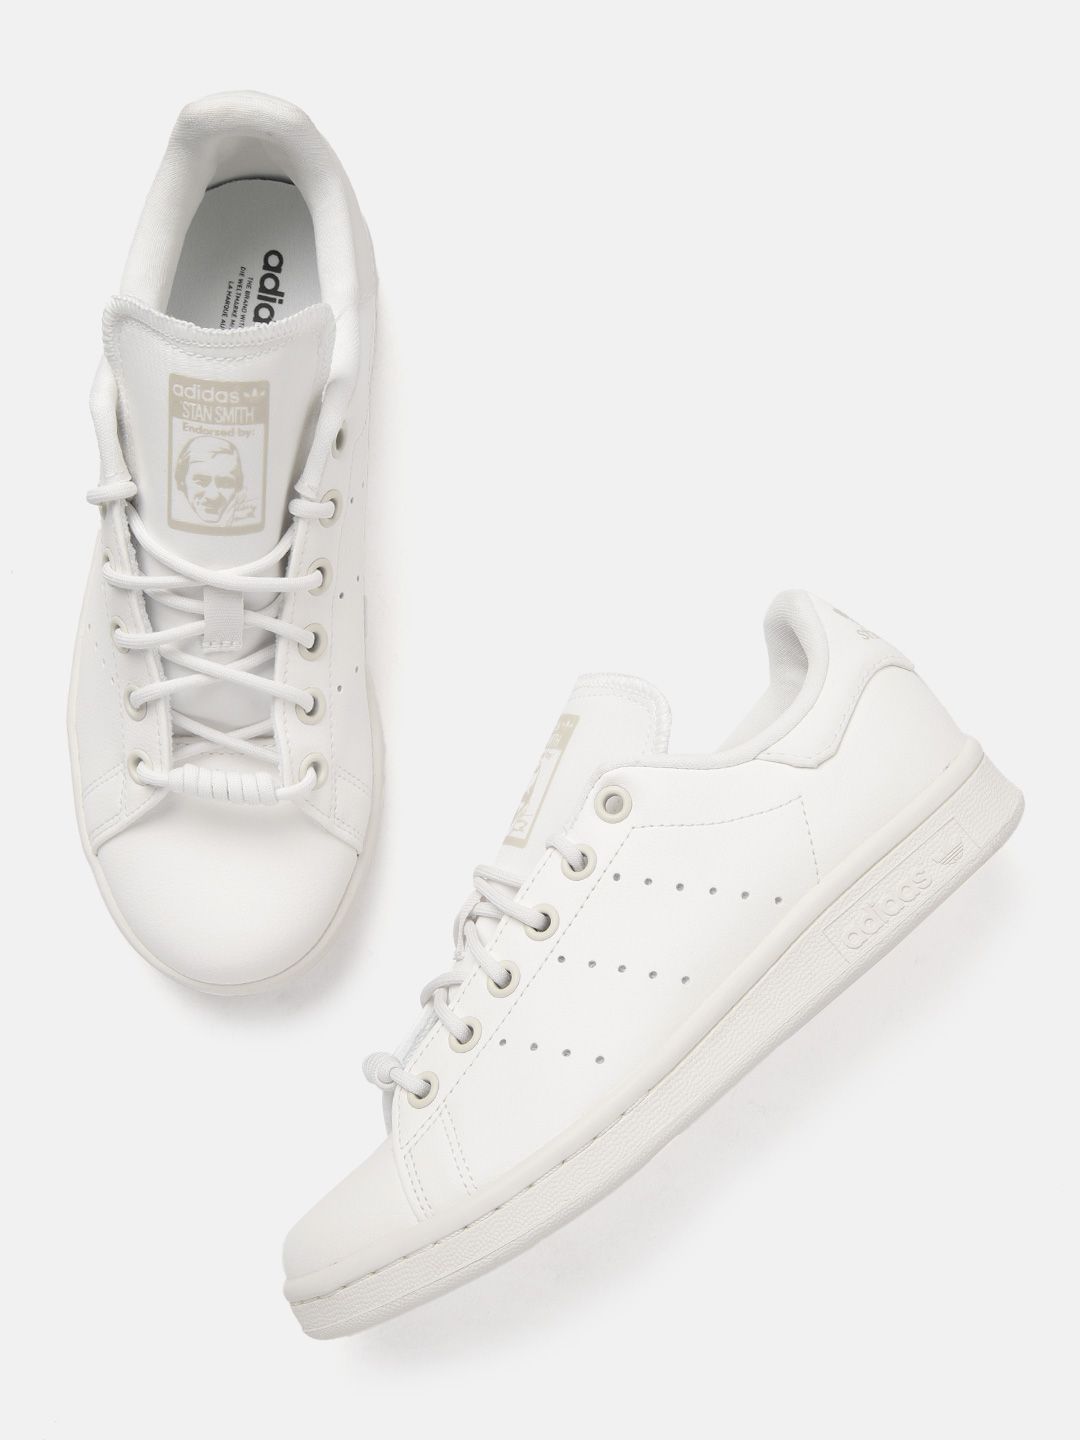 ADIDAS Originals Women White Solid Stan Smith Sneakers with Perforated Detail Price in India